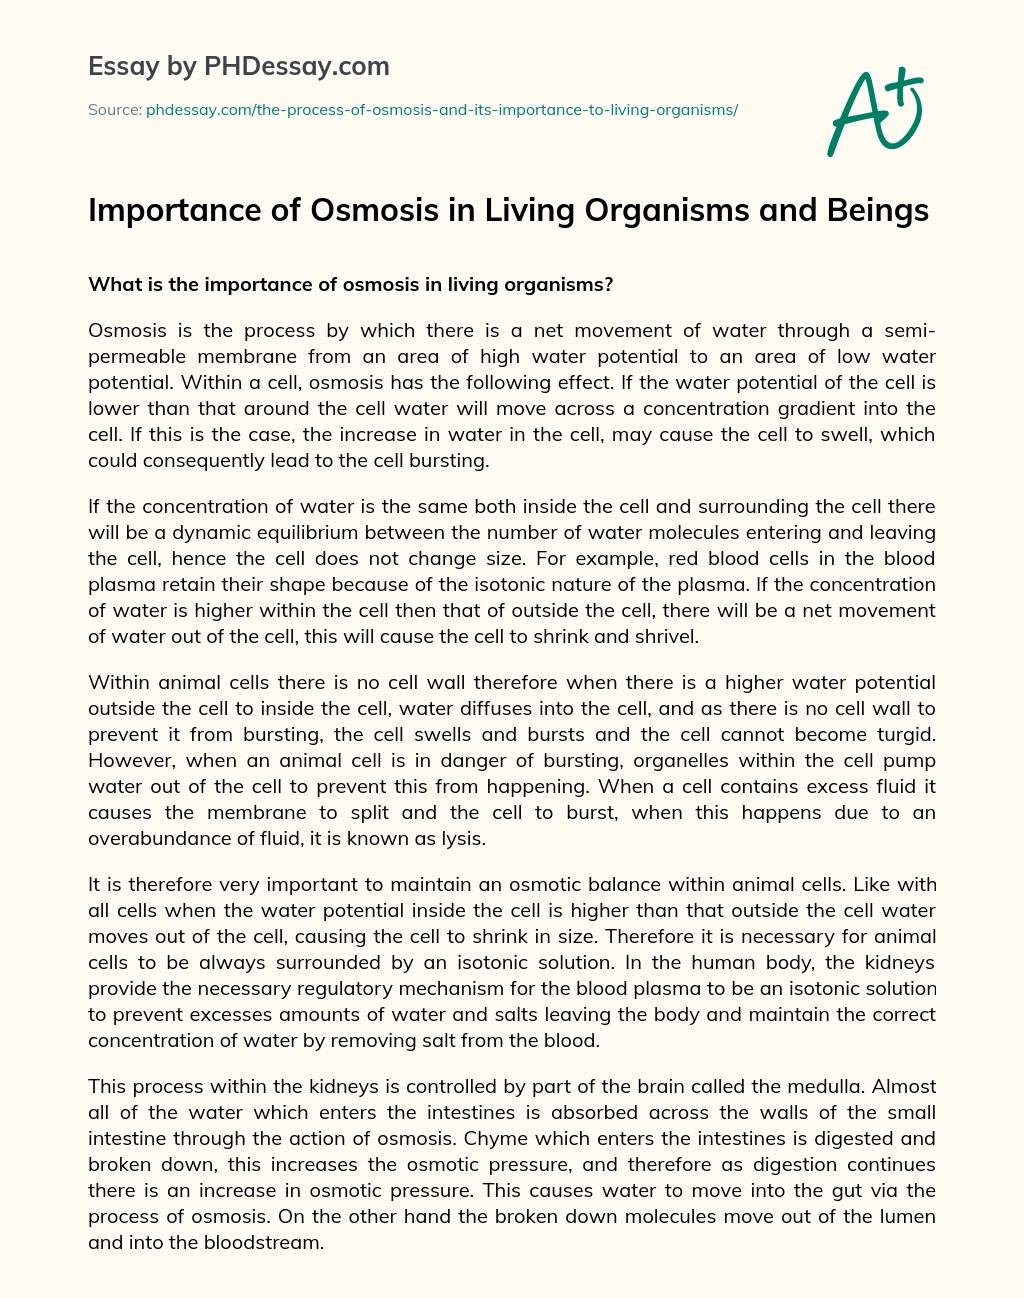 Importance of Osmosis in Living Organisms and Beings essay